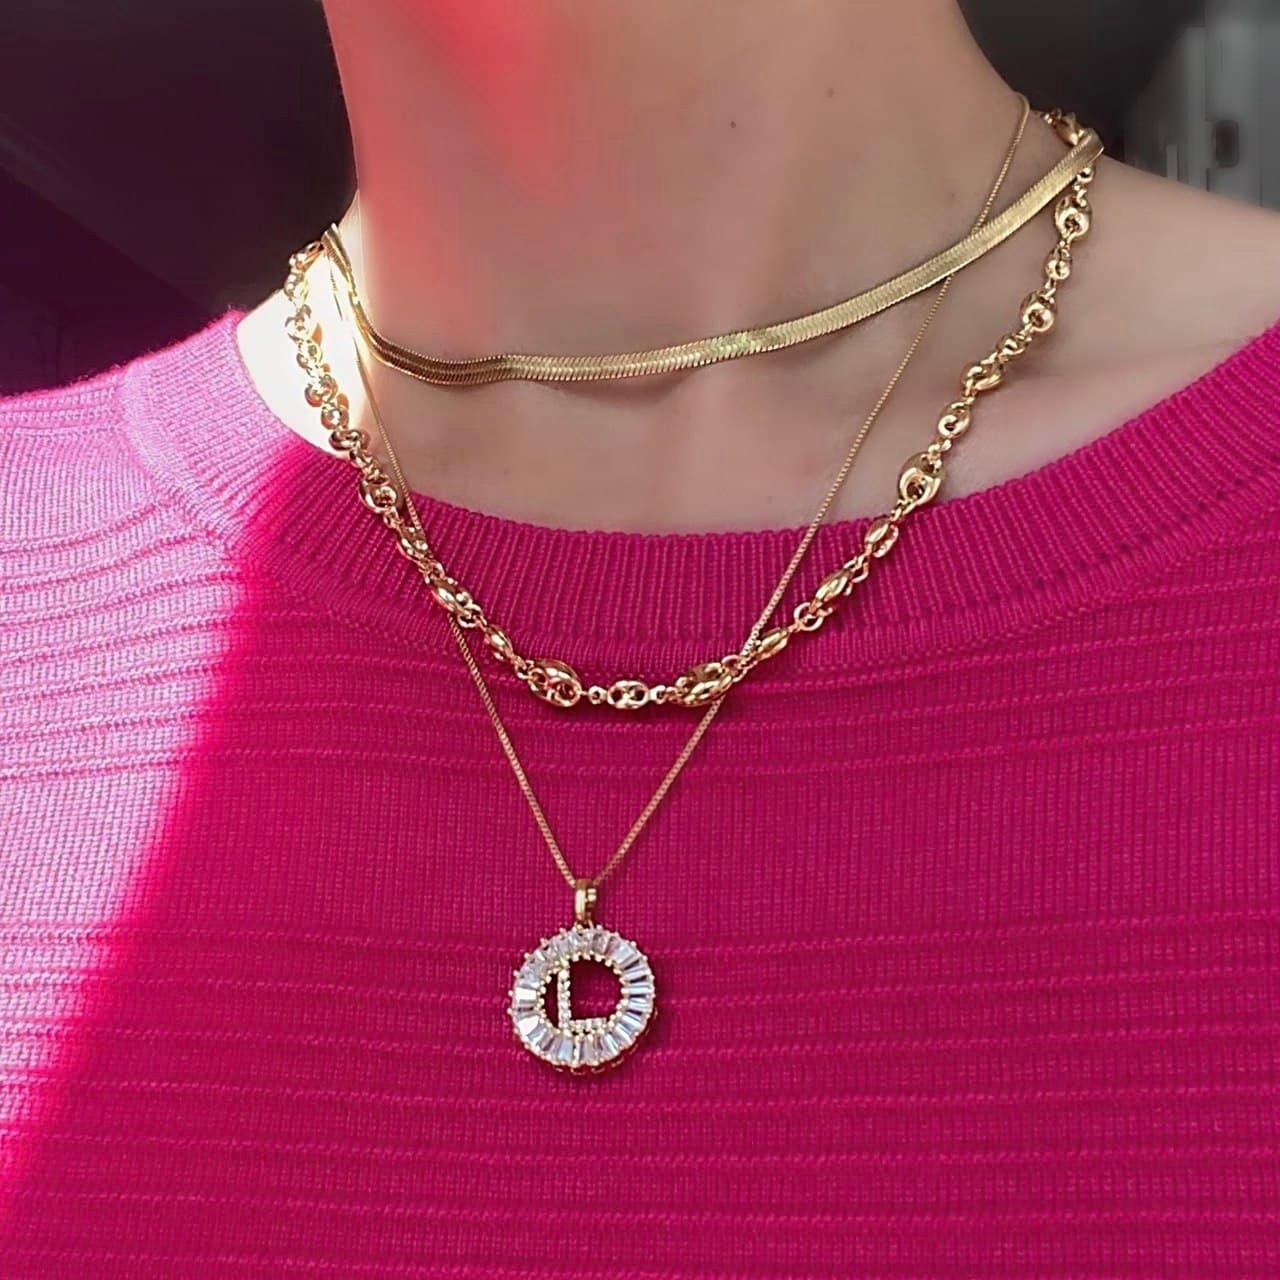 18k Gold Filled Fancy Small Initials Featuring Baguette Cubic Zirconia Pendant In A Box Chain Necklace  Wholesale Jewelry Supplies - Silver